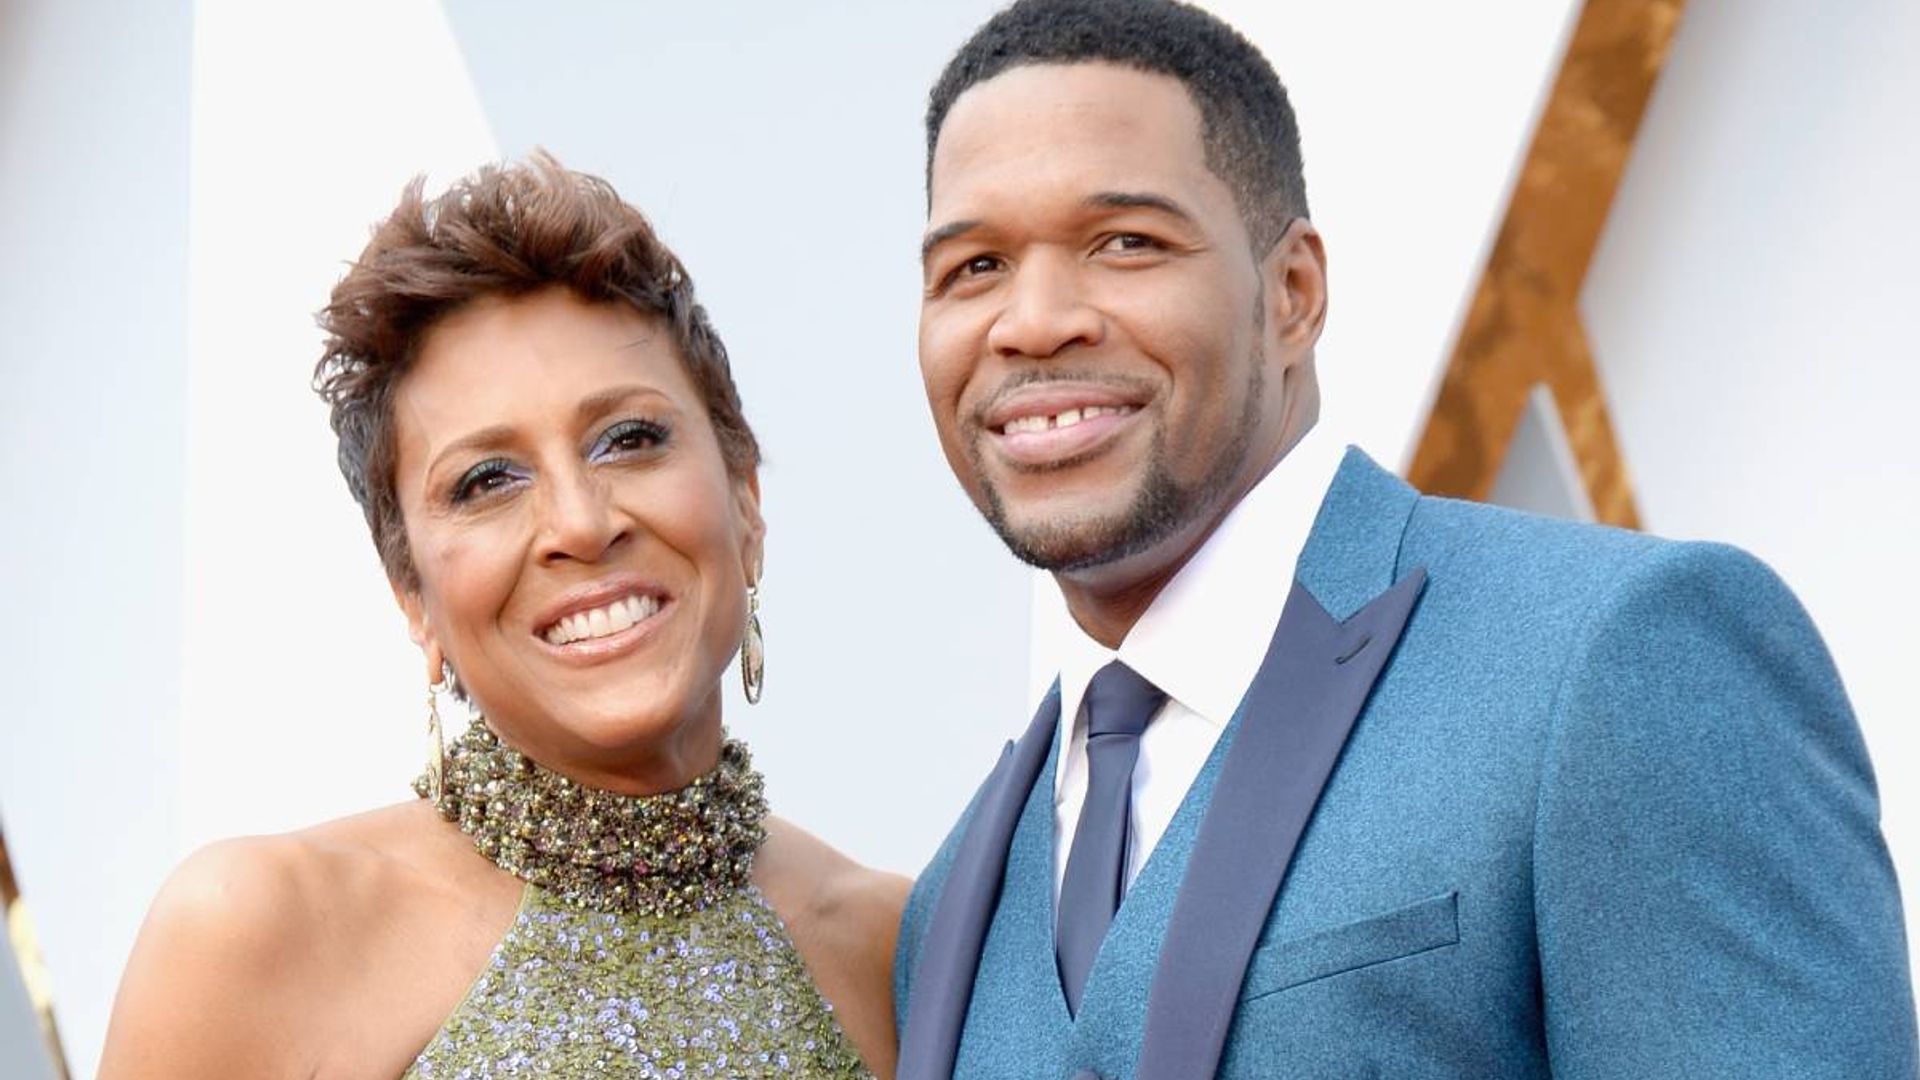 Gmas Michael Strahan Pays Heartfelt Tribute To Co Star Robin Roberts For Incredibly Poignant 